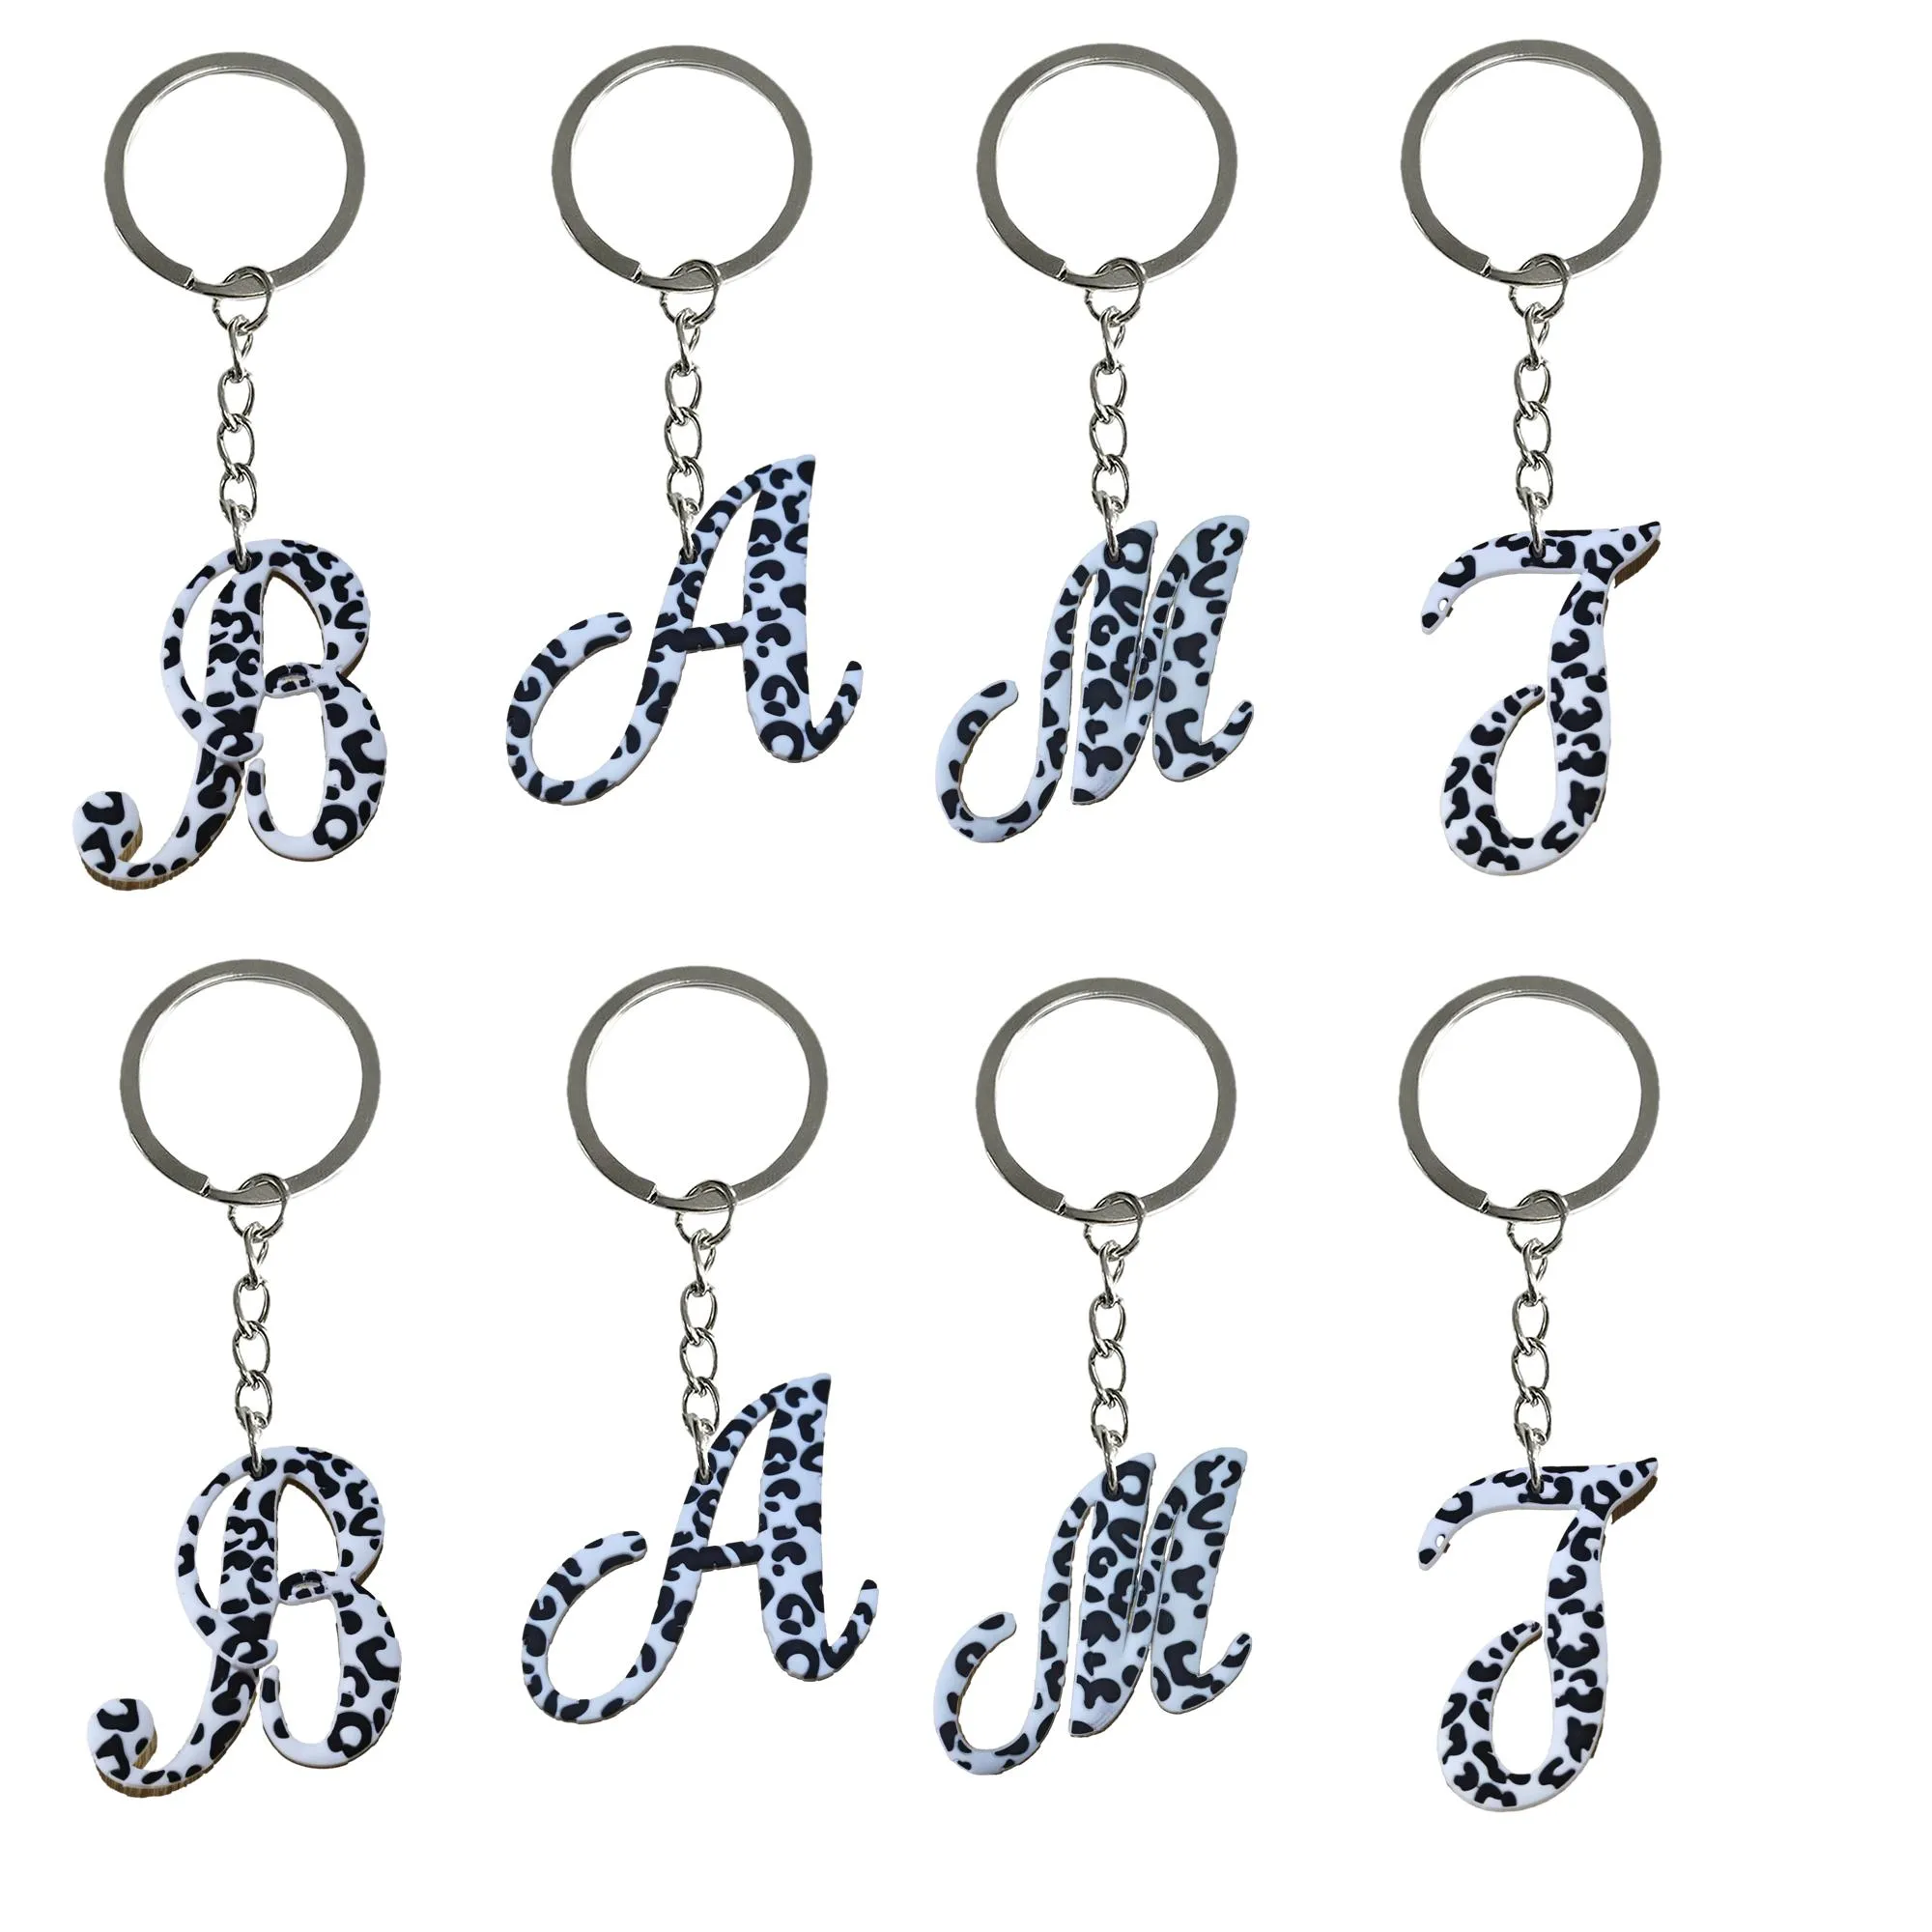 Sleutelringen Zebra grote letters Keychain Keychains Tags Goodie Bag Stuffer Kerstcadeaus en Holiday Charms Chain Ring Gift voor fans K Otnro